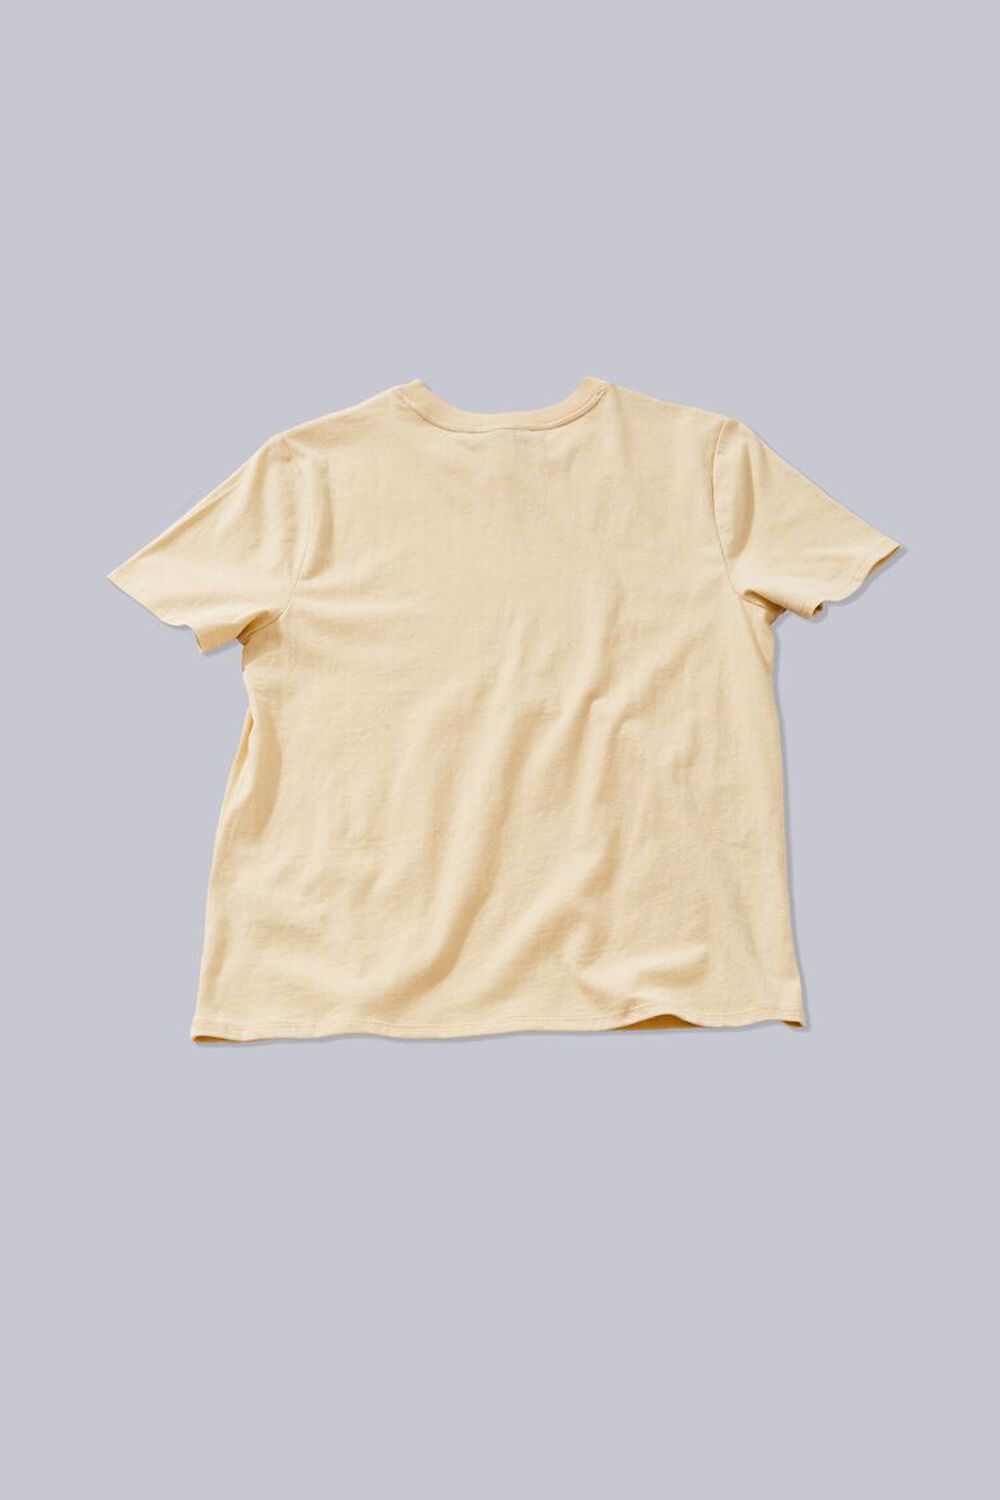 Organically Grown Cotton Love Graphic Tee